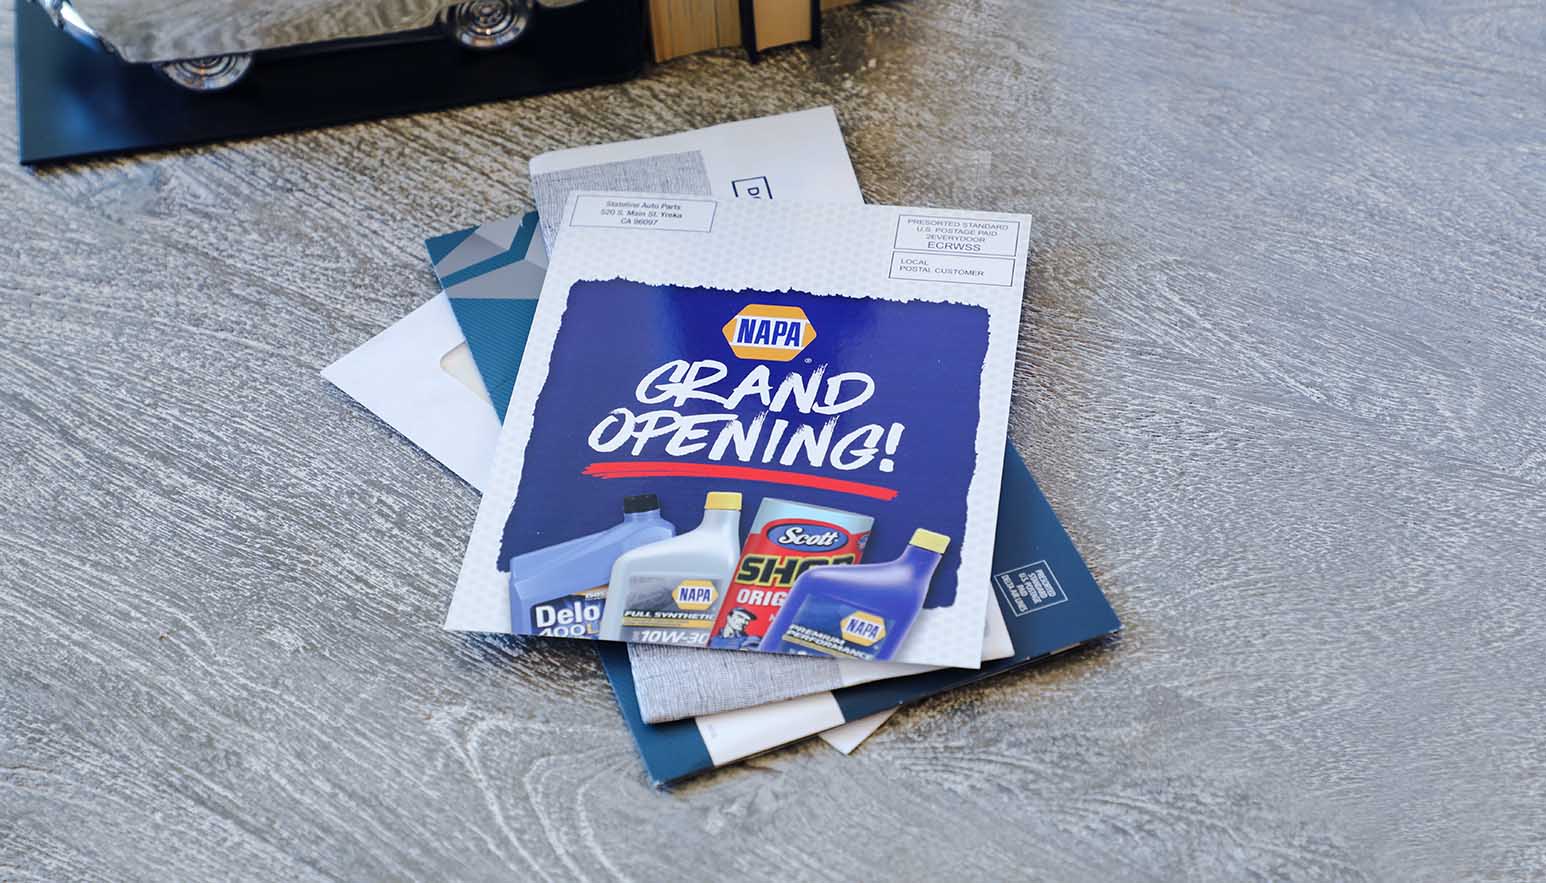 Printing EDDM® postcards is a cost-effective mail solution that enables you to geographically target neighborhoods that can potentially include the ideal customers for your business.